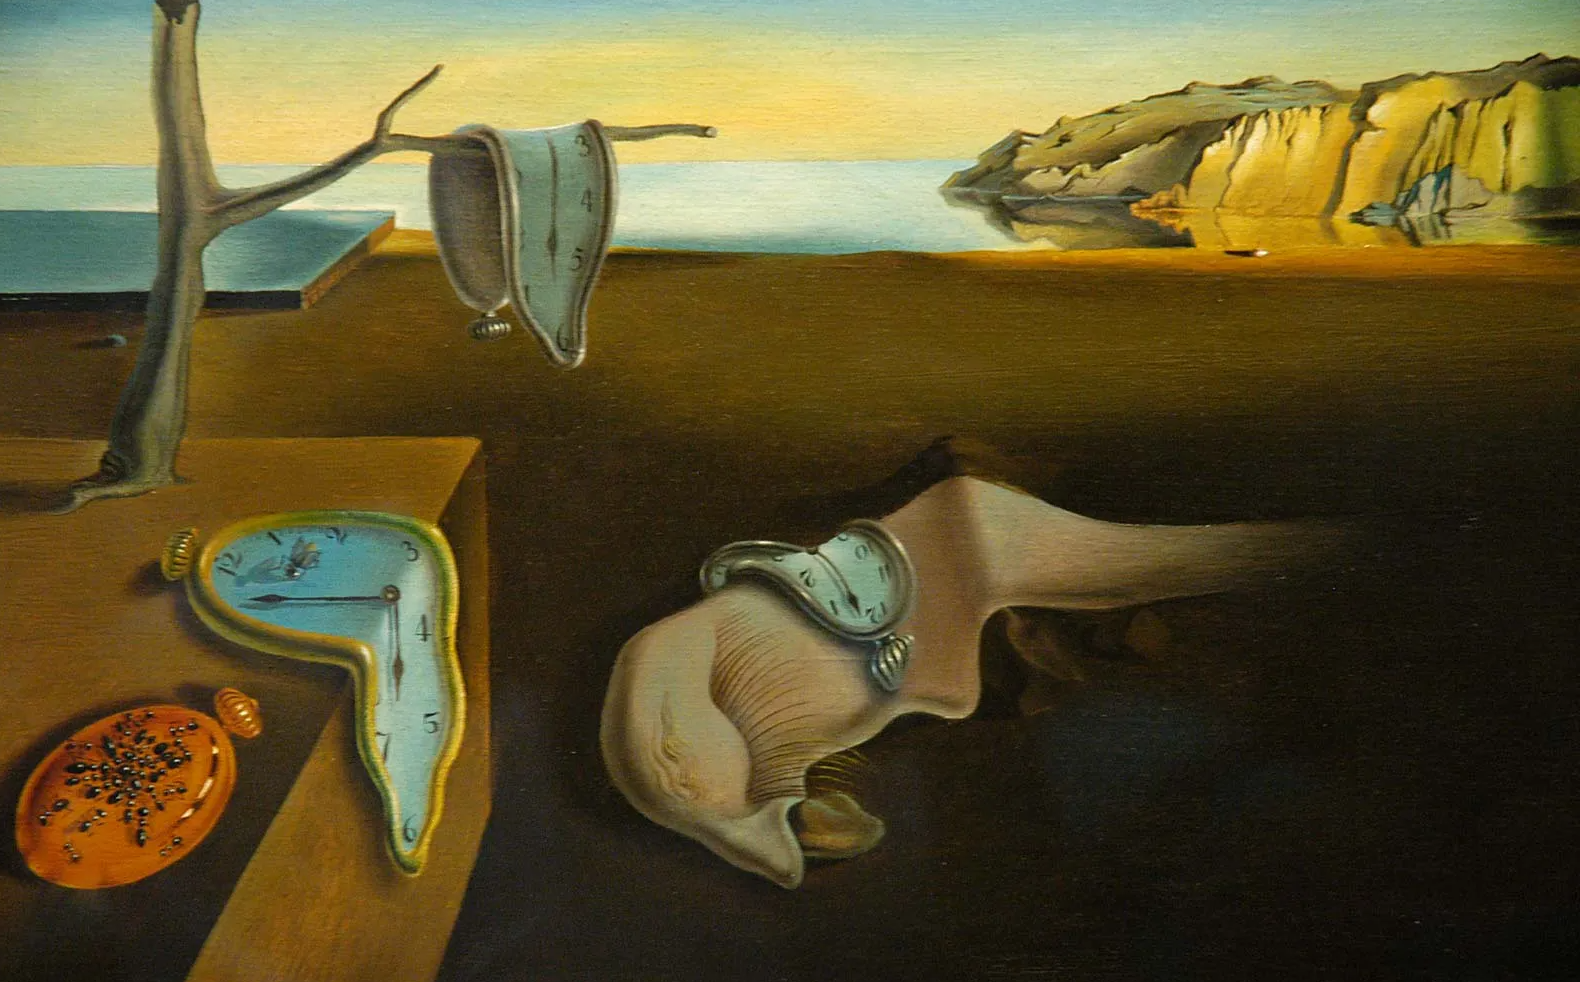 The Persistence of Memory by Salvador Dalí, 1931